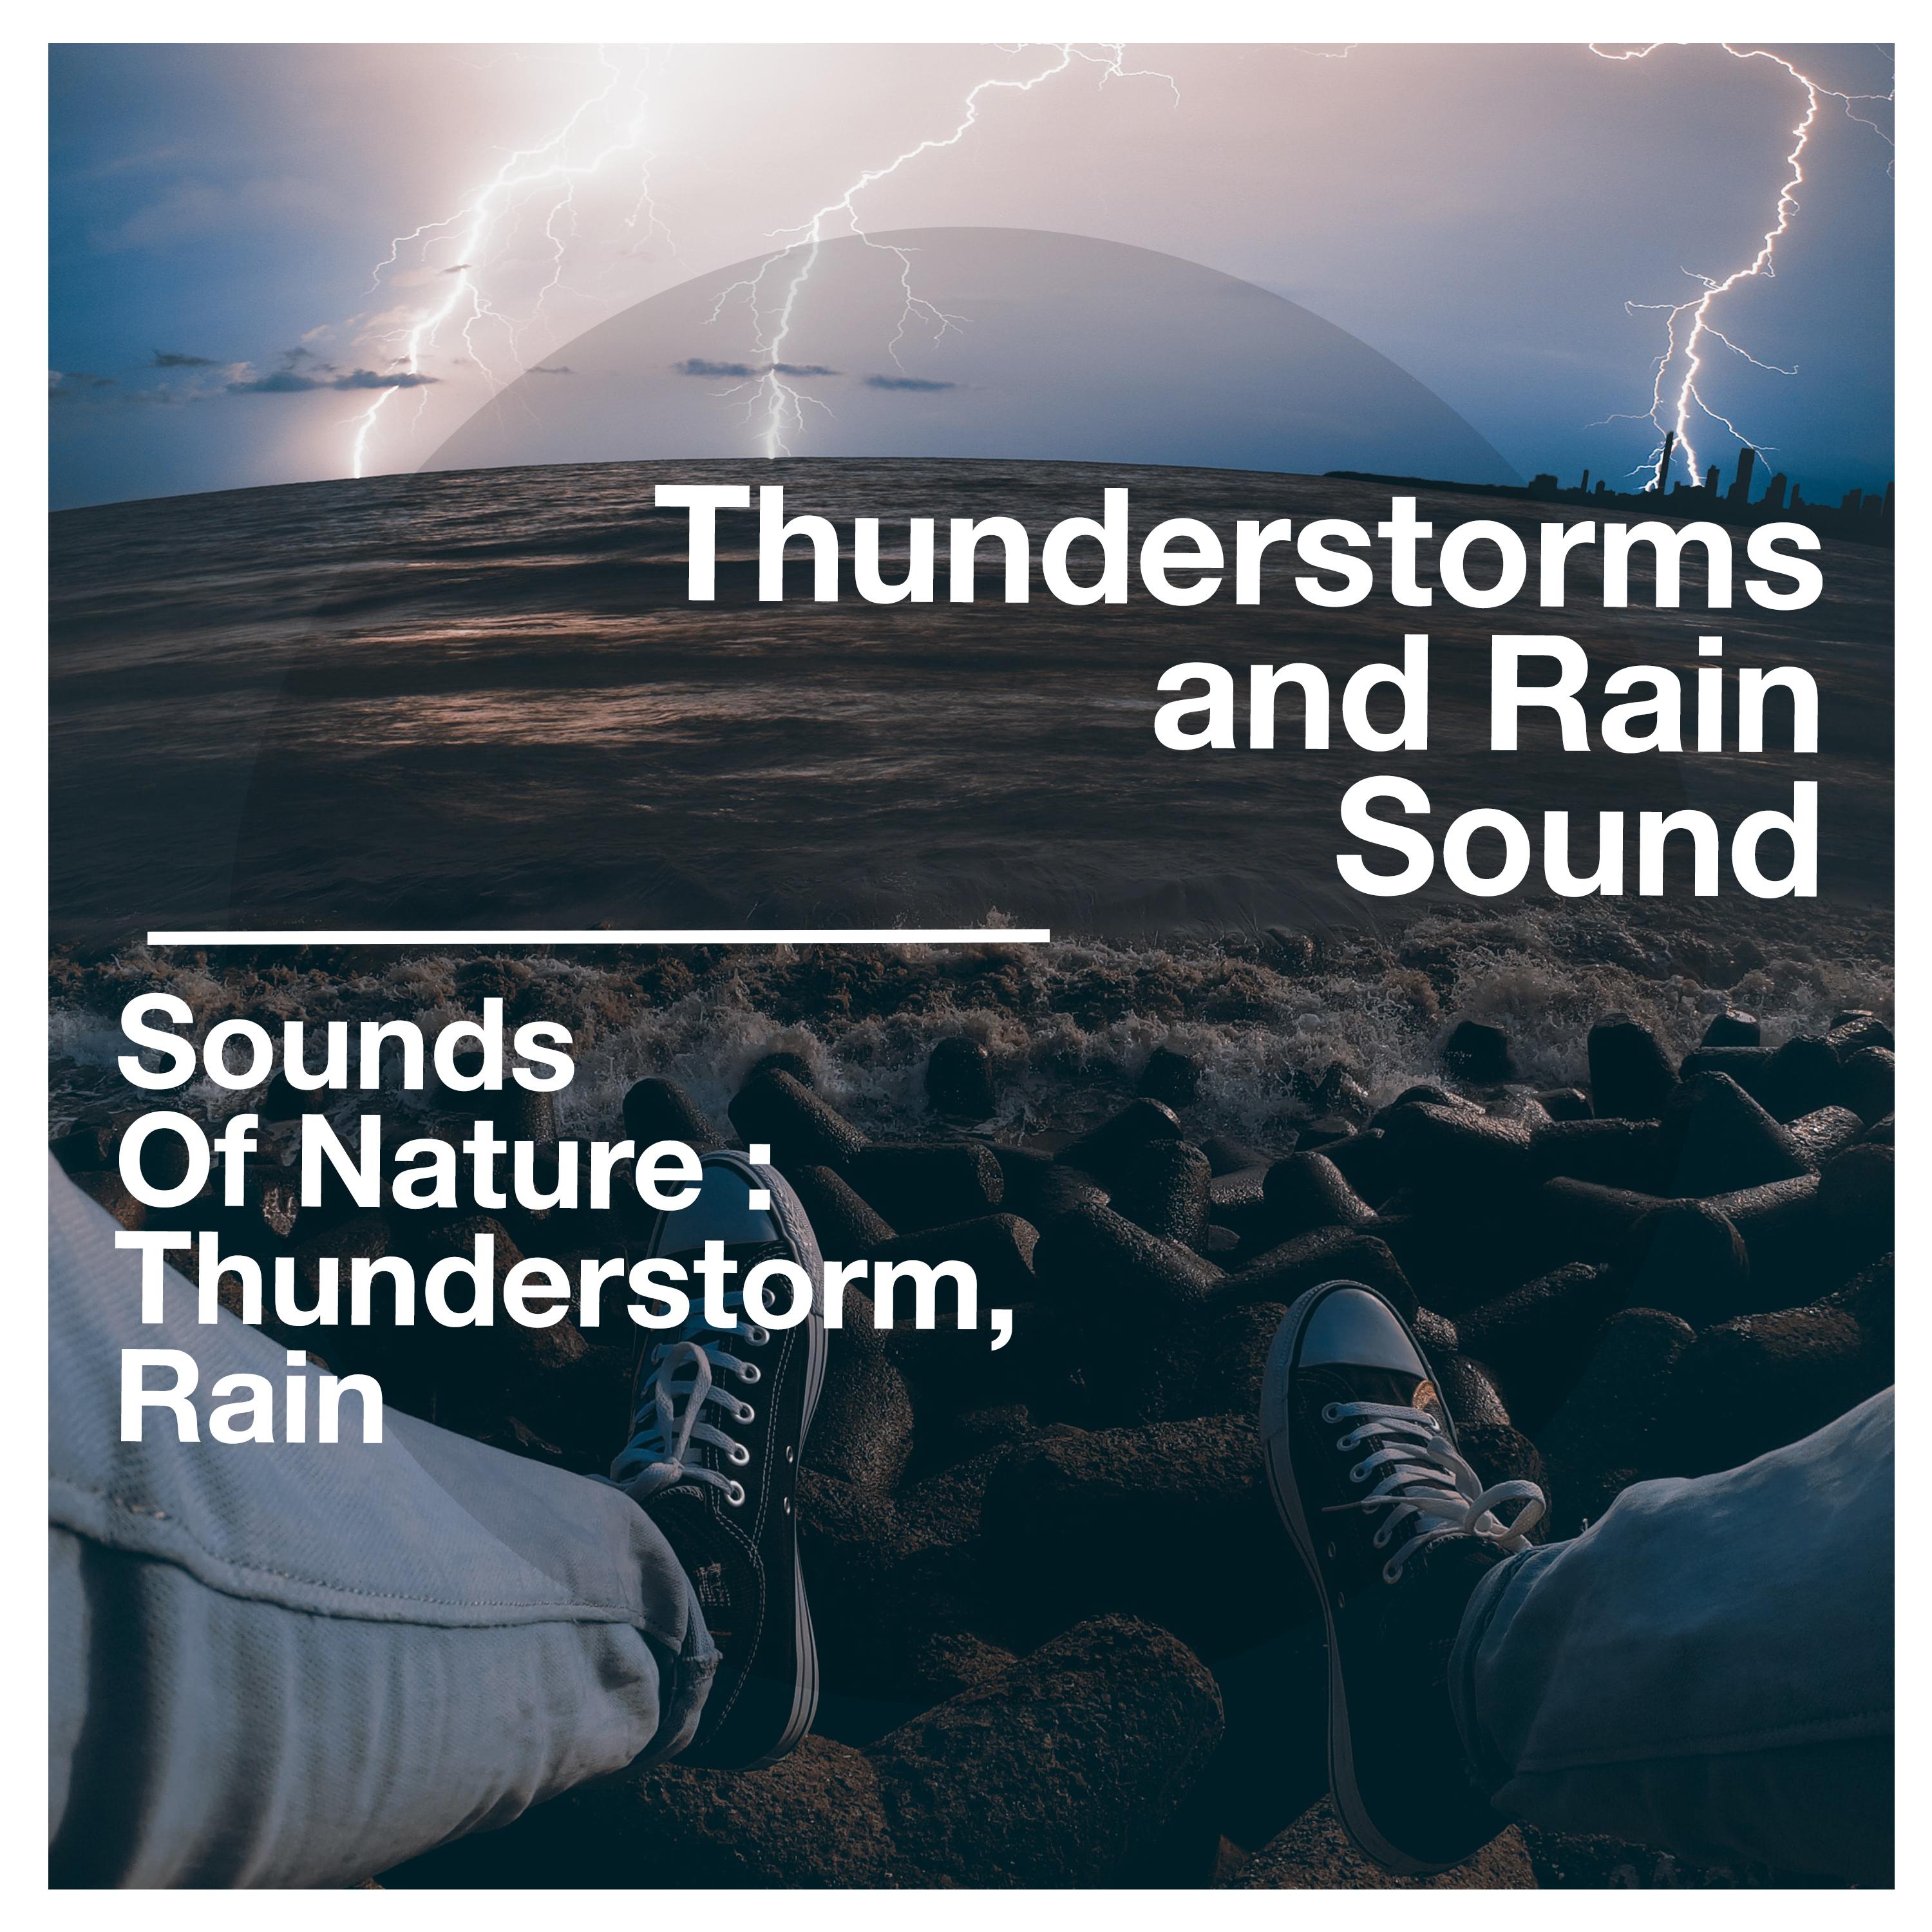 Thunderstorms and Rain Sound